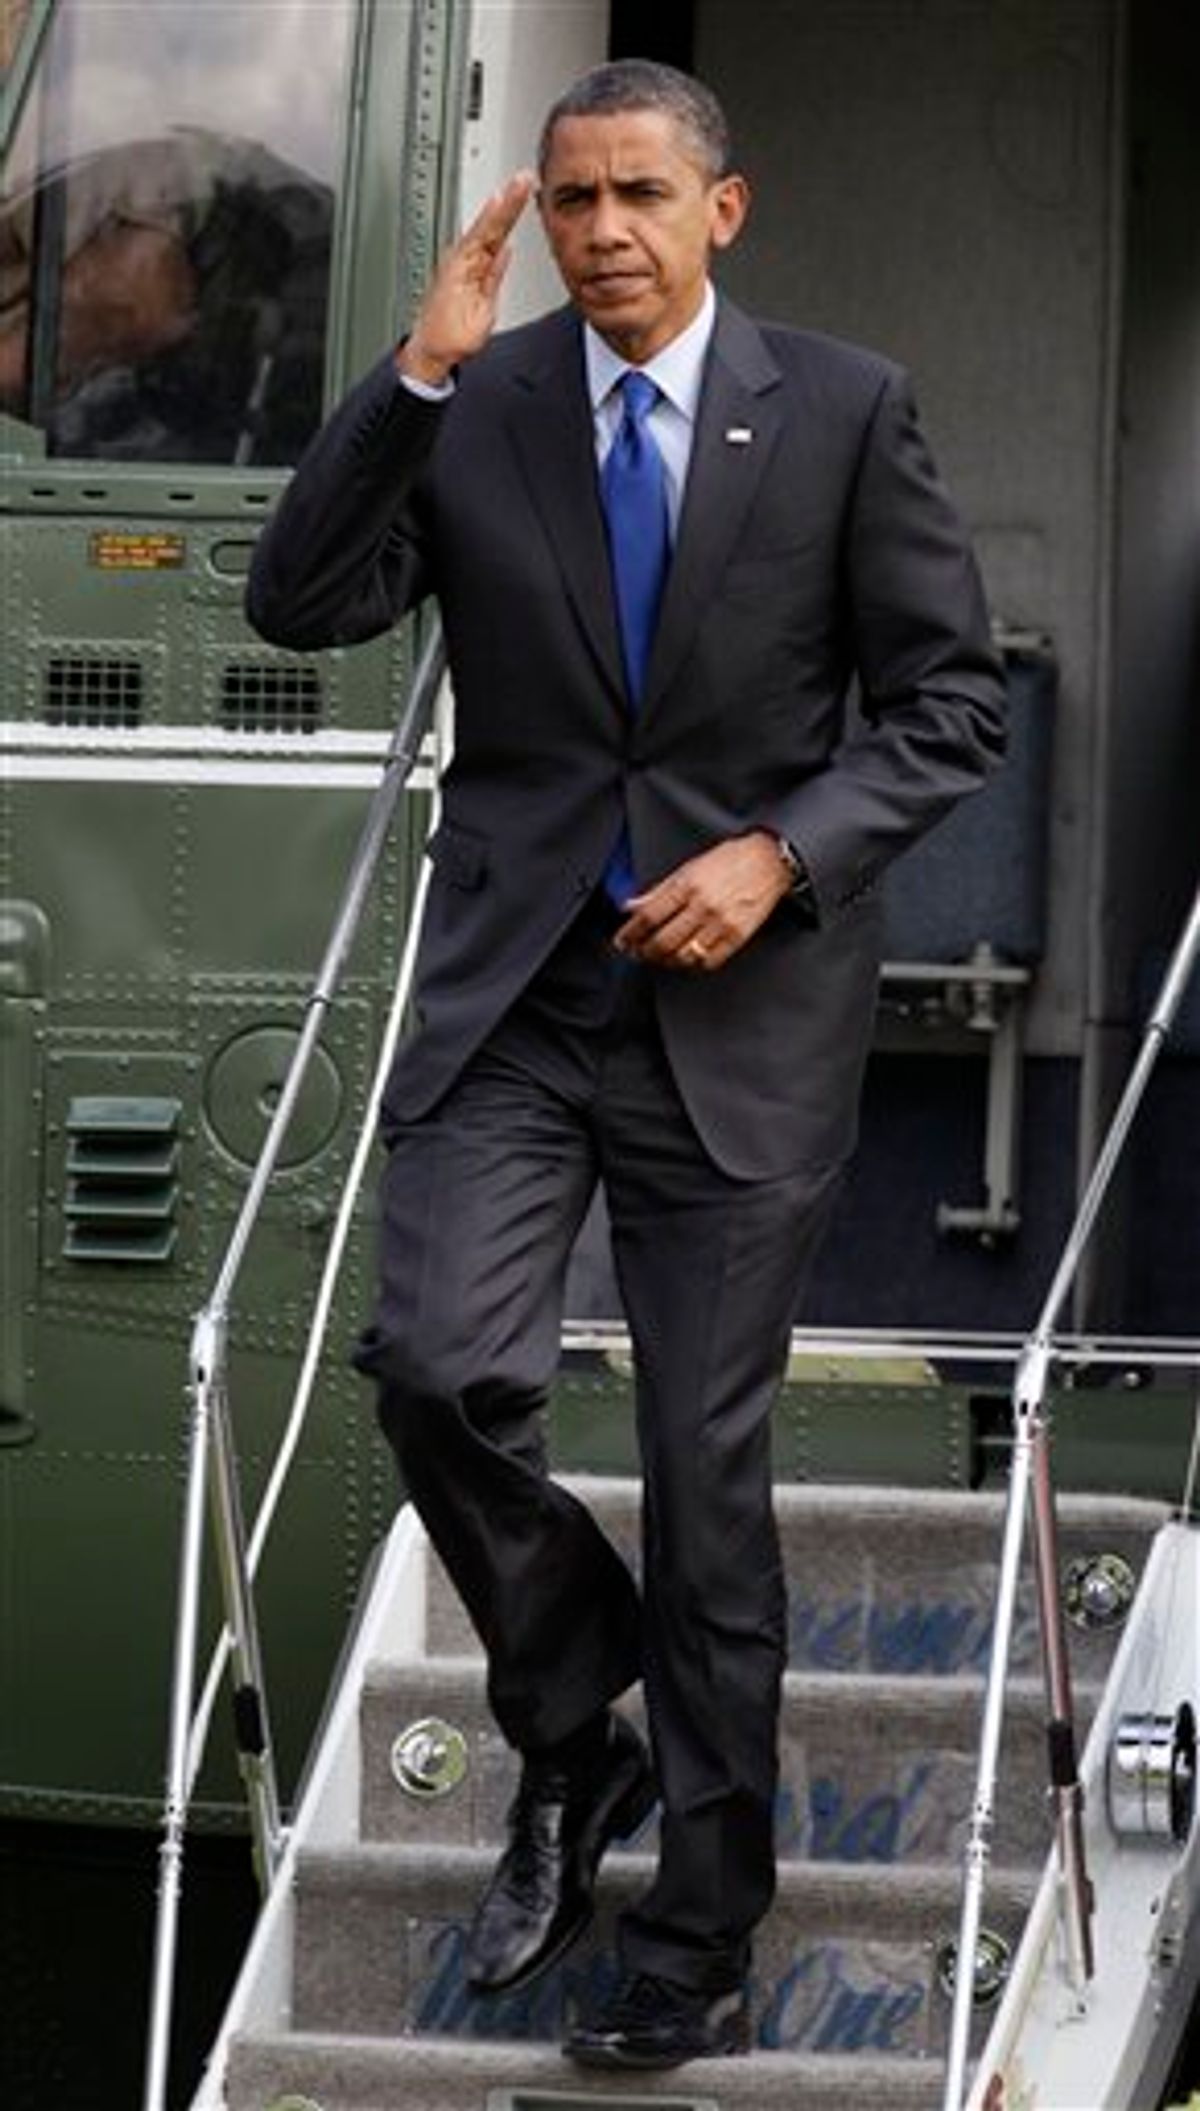 President Barack Obama salutes as he steps off of Marine One on the South Lawn of the White House in Washington, Saturday, July 10, 2010. (AP Photo/Carolyn Kaster) (AP)